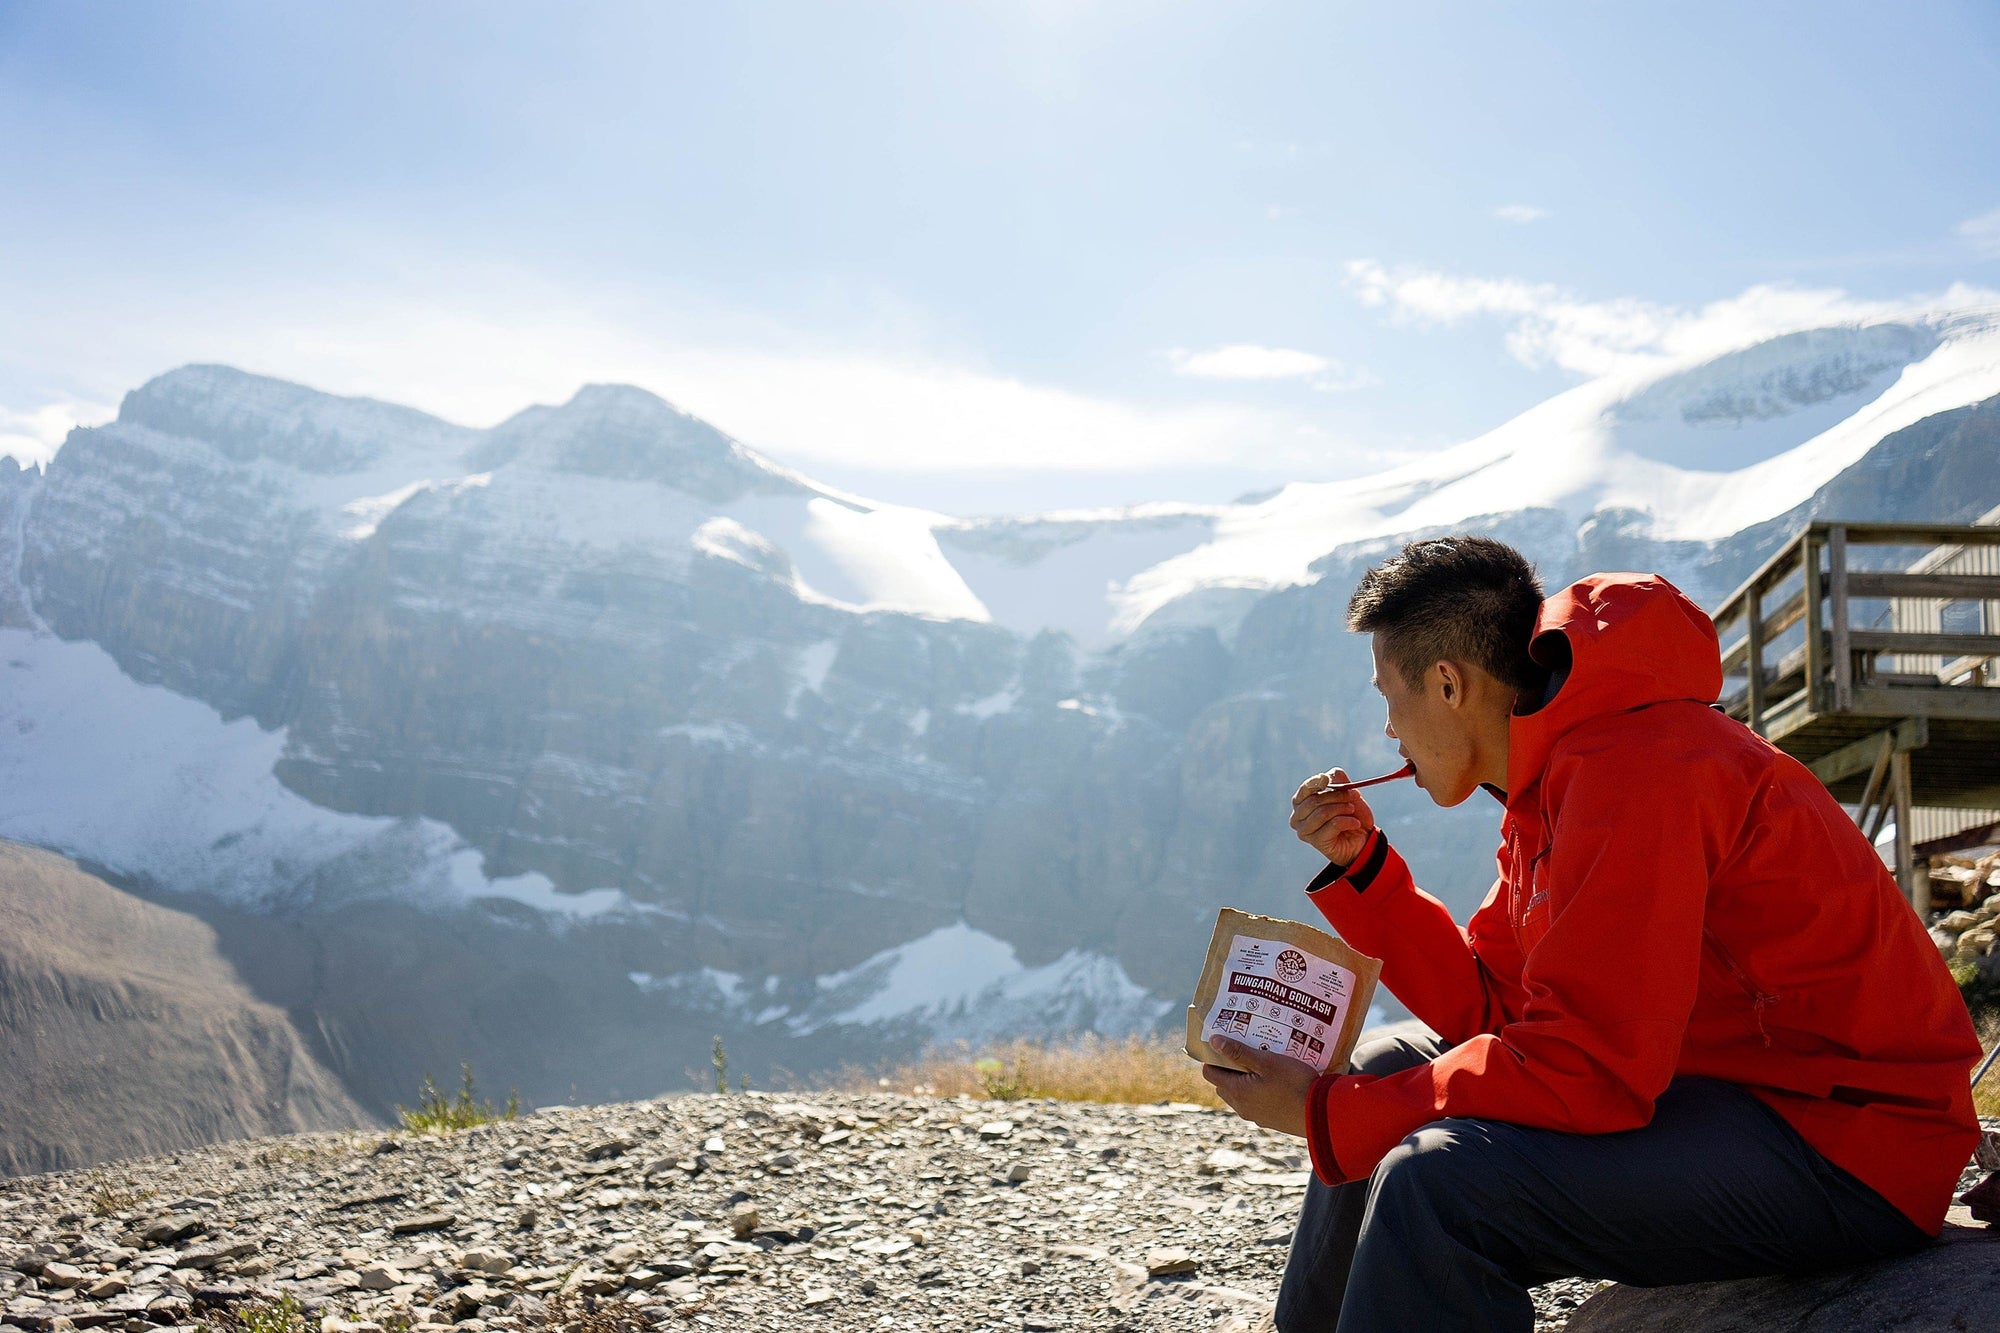 Man eating Hungarian Goulash 112g meal size on top of mountain outdoors overlooking snowy mountain peaks. 